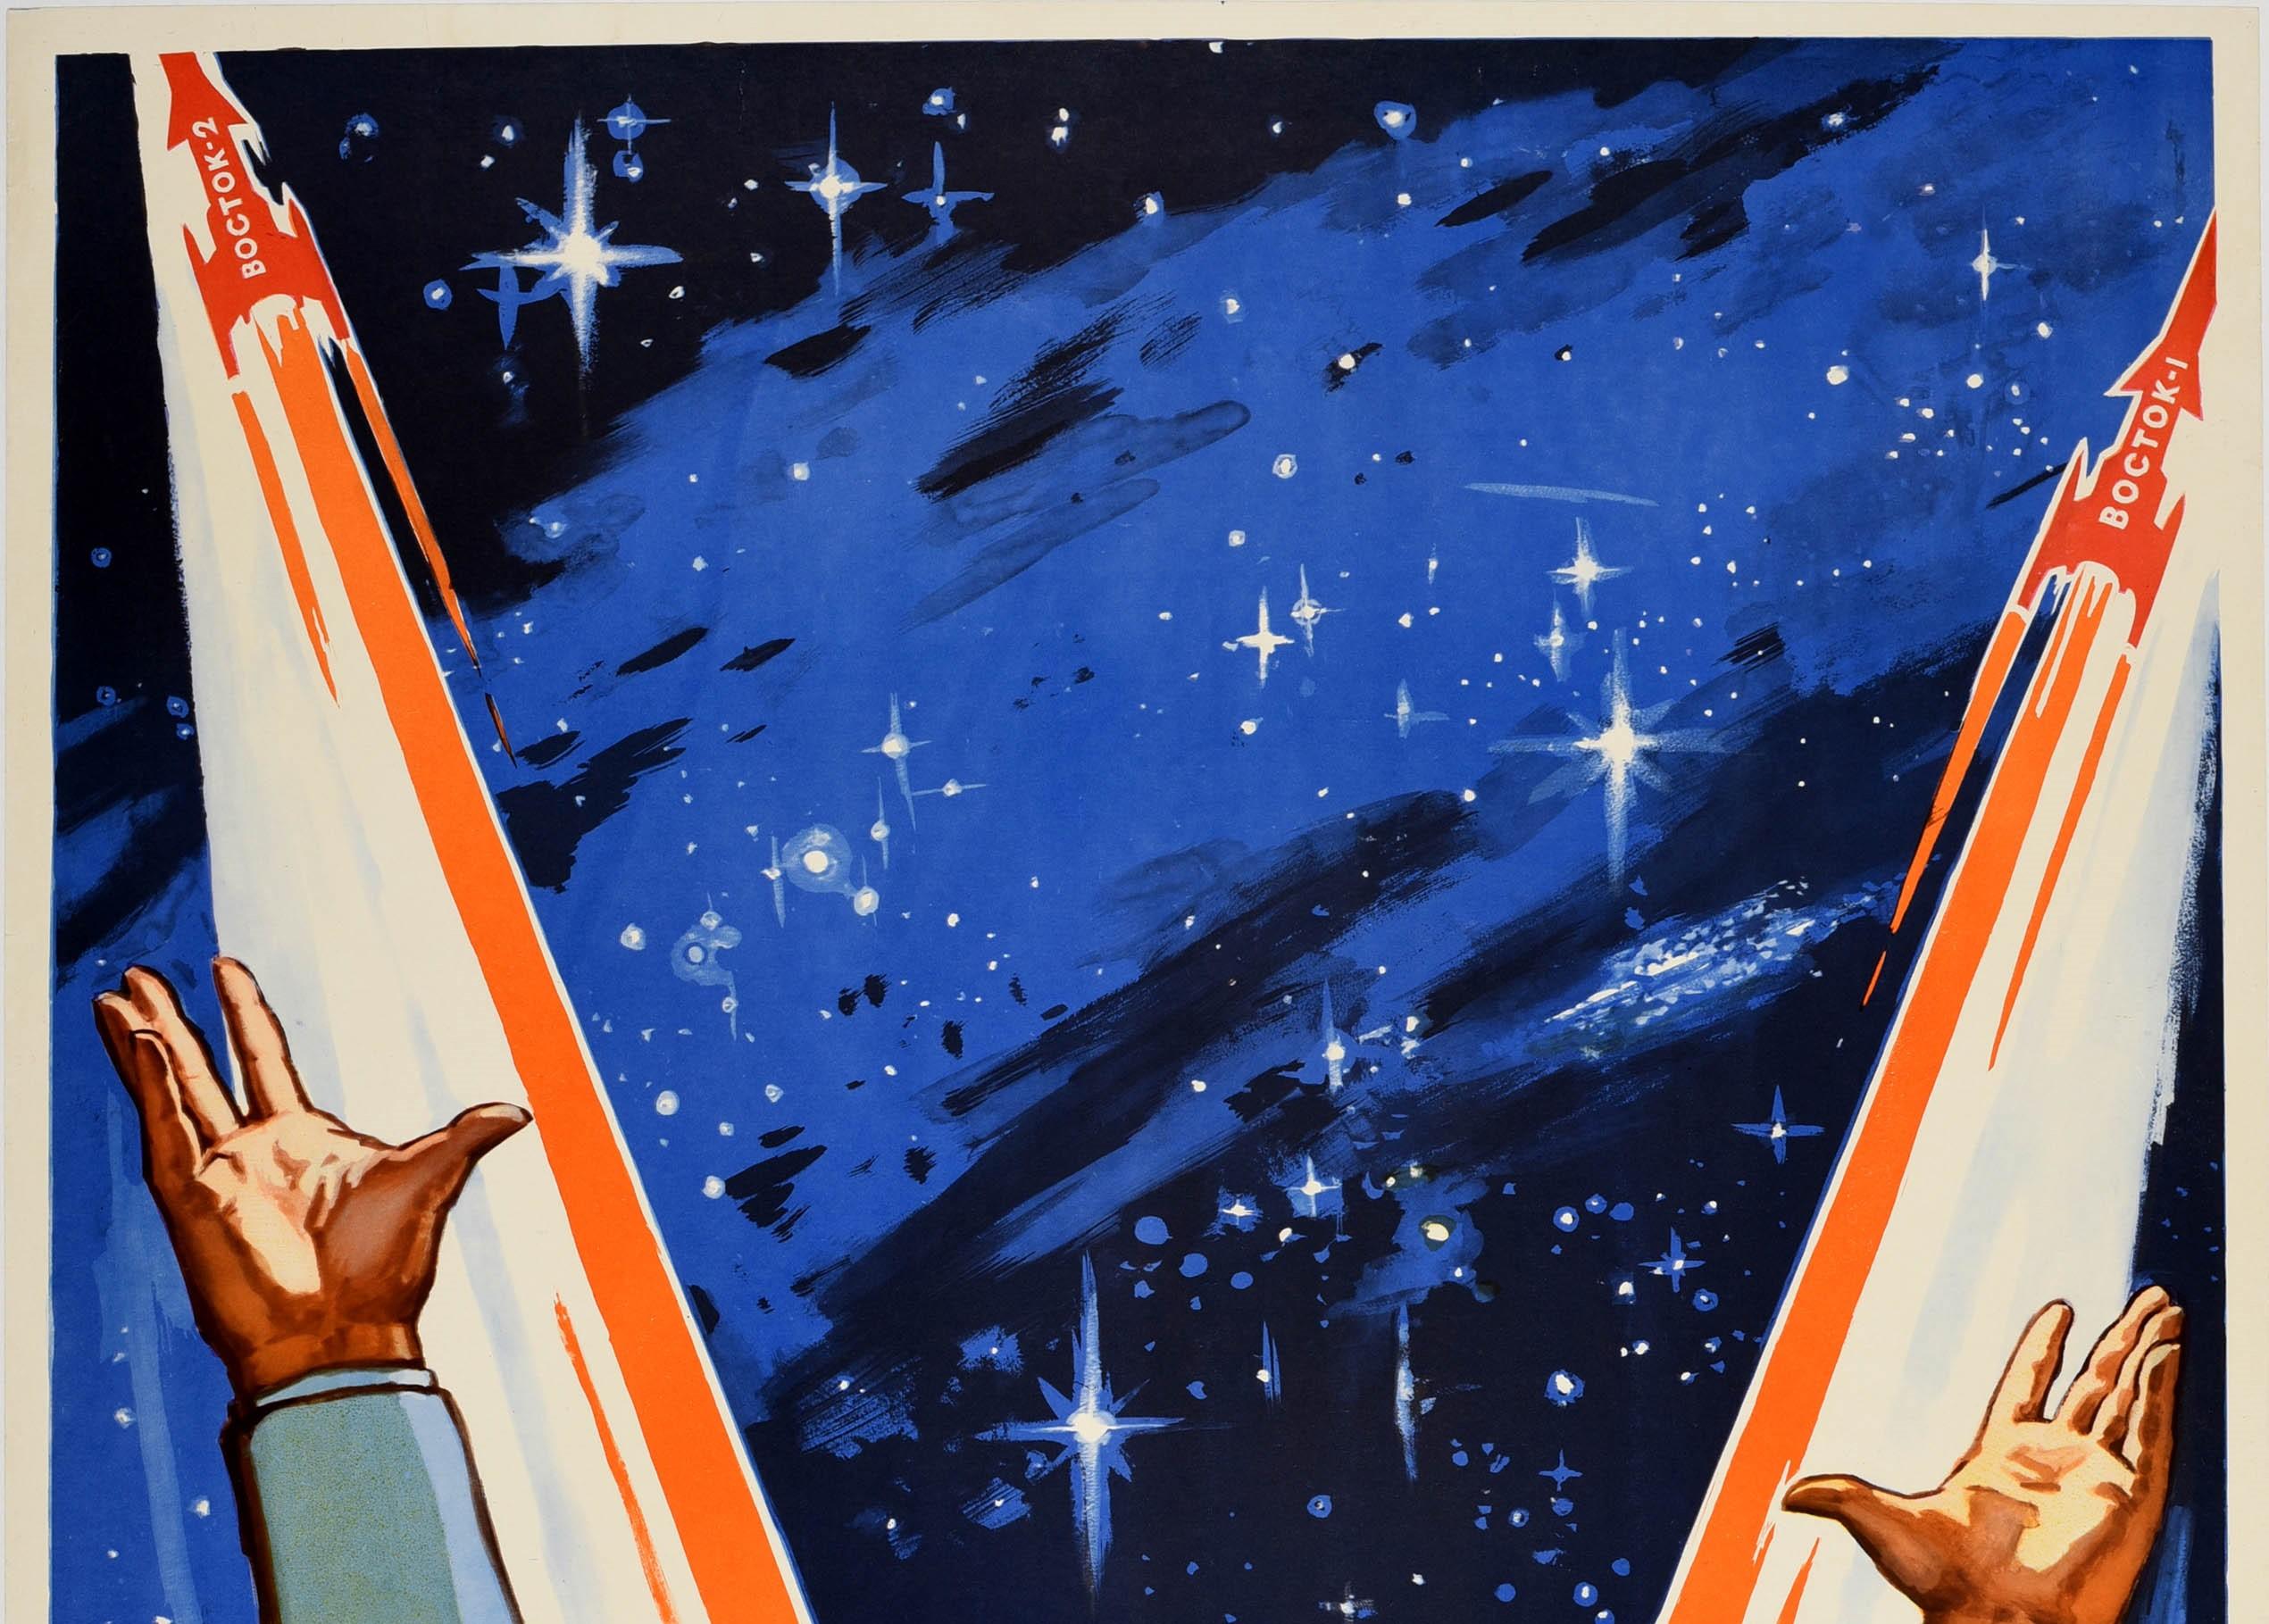 Original vintage Soviet propaganda poster - For the Glory of Communism! / Во Славу Коммунизма! - featuring a space illustration depicting a smiling cosmonaut pilot in uniform holding up his arms in front of a starry sky with two rockets flying up -